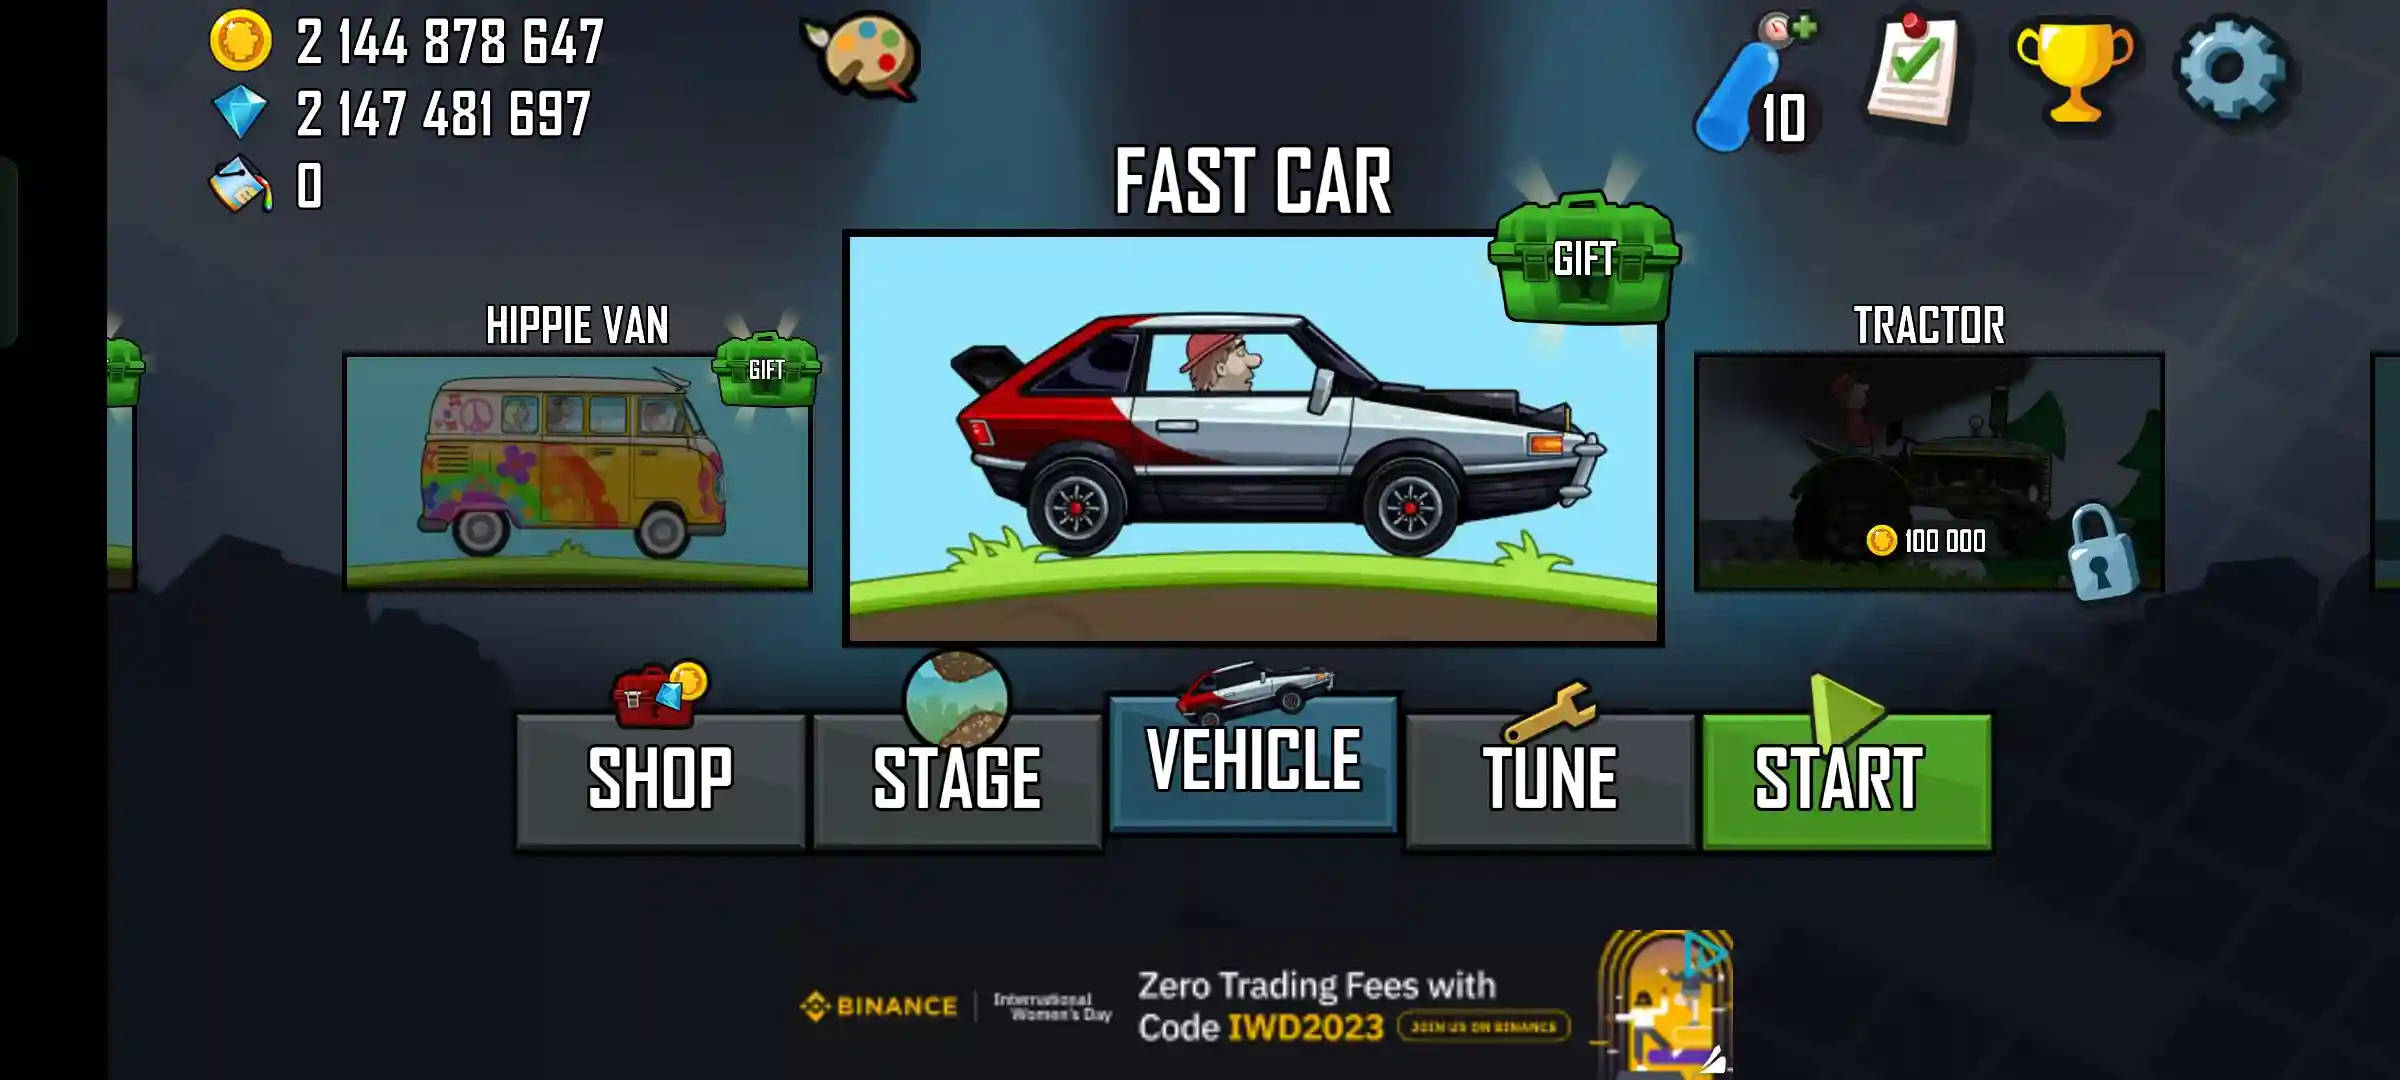 Download Hill Climb Racing (MOD, Unlimited Money) 1.60.1 APK for